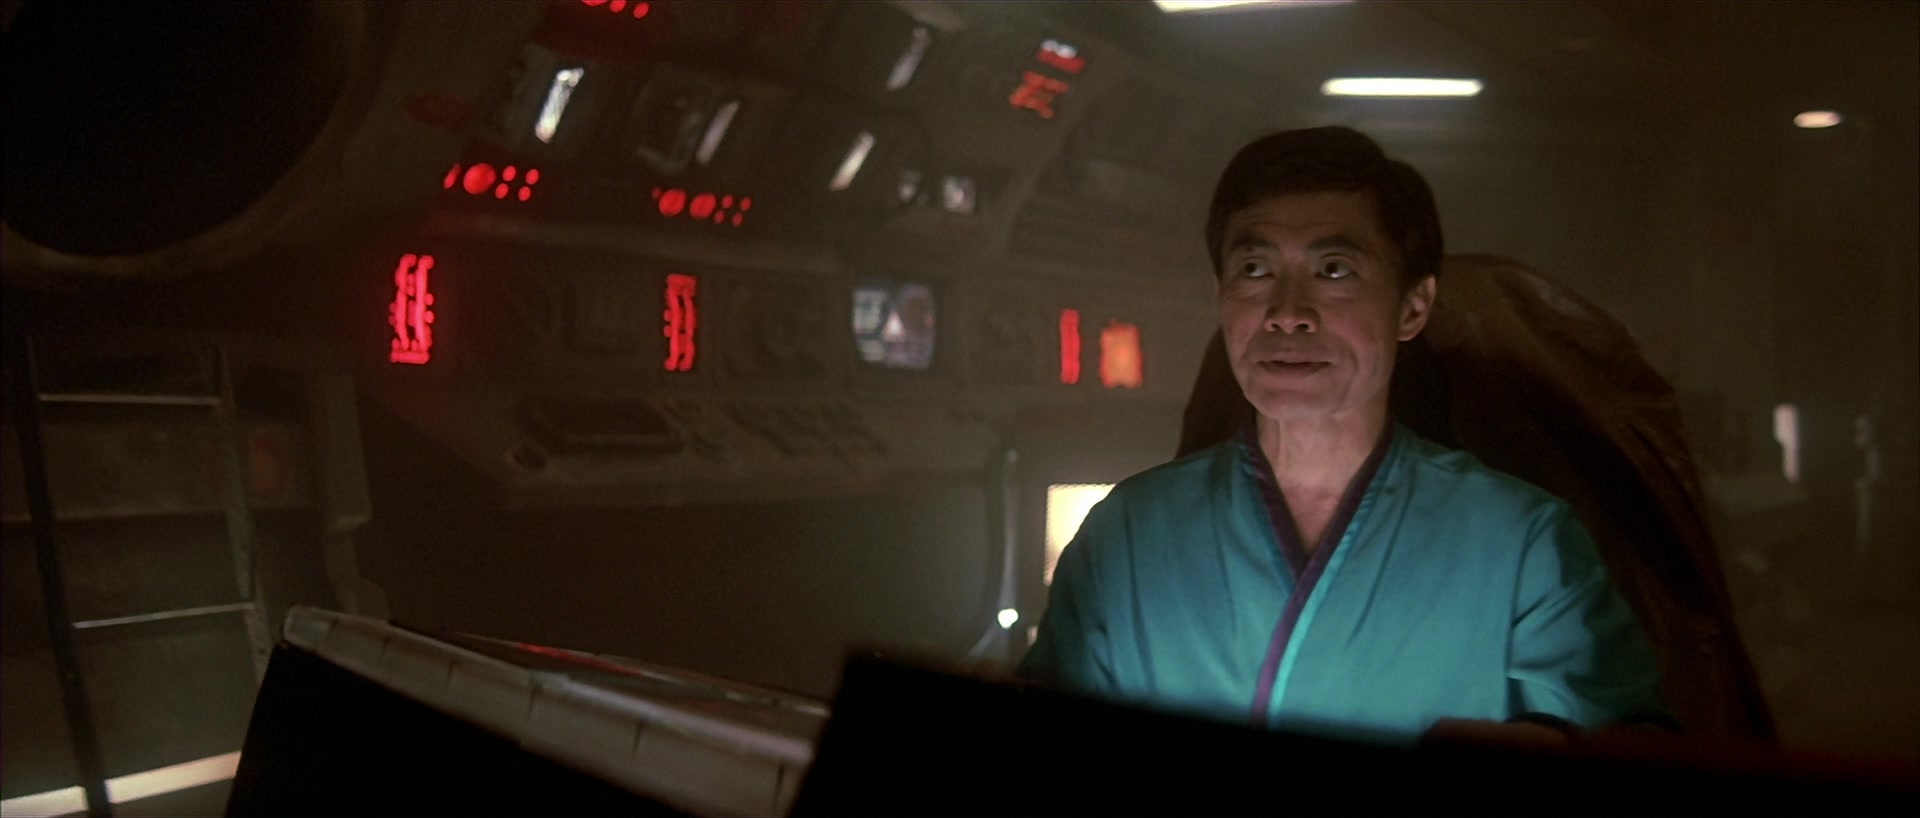 Sulu (George Takei) prepares to set the Bounty down in Golden Gate Park after arriving in 1986 San Francisco Star Trek IV: The Voyage Home (1986), Paramount Pictures via Blu-ray